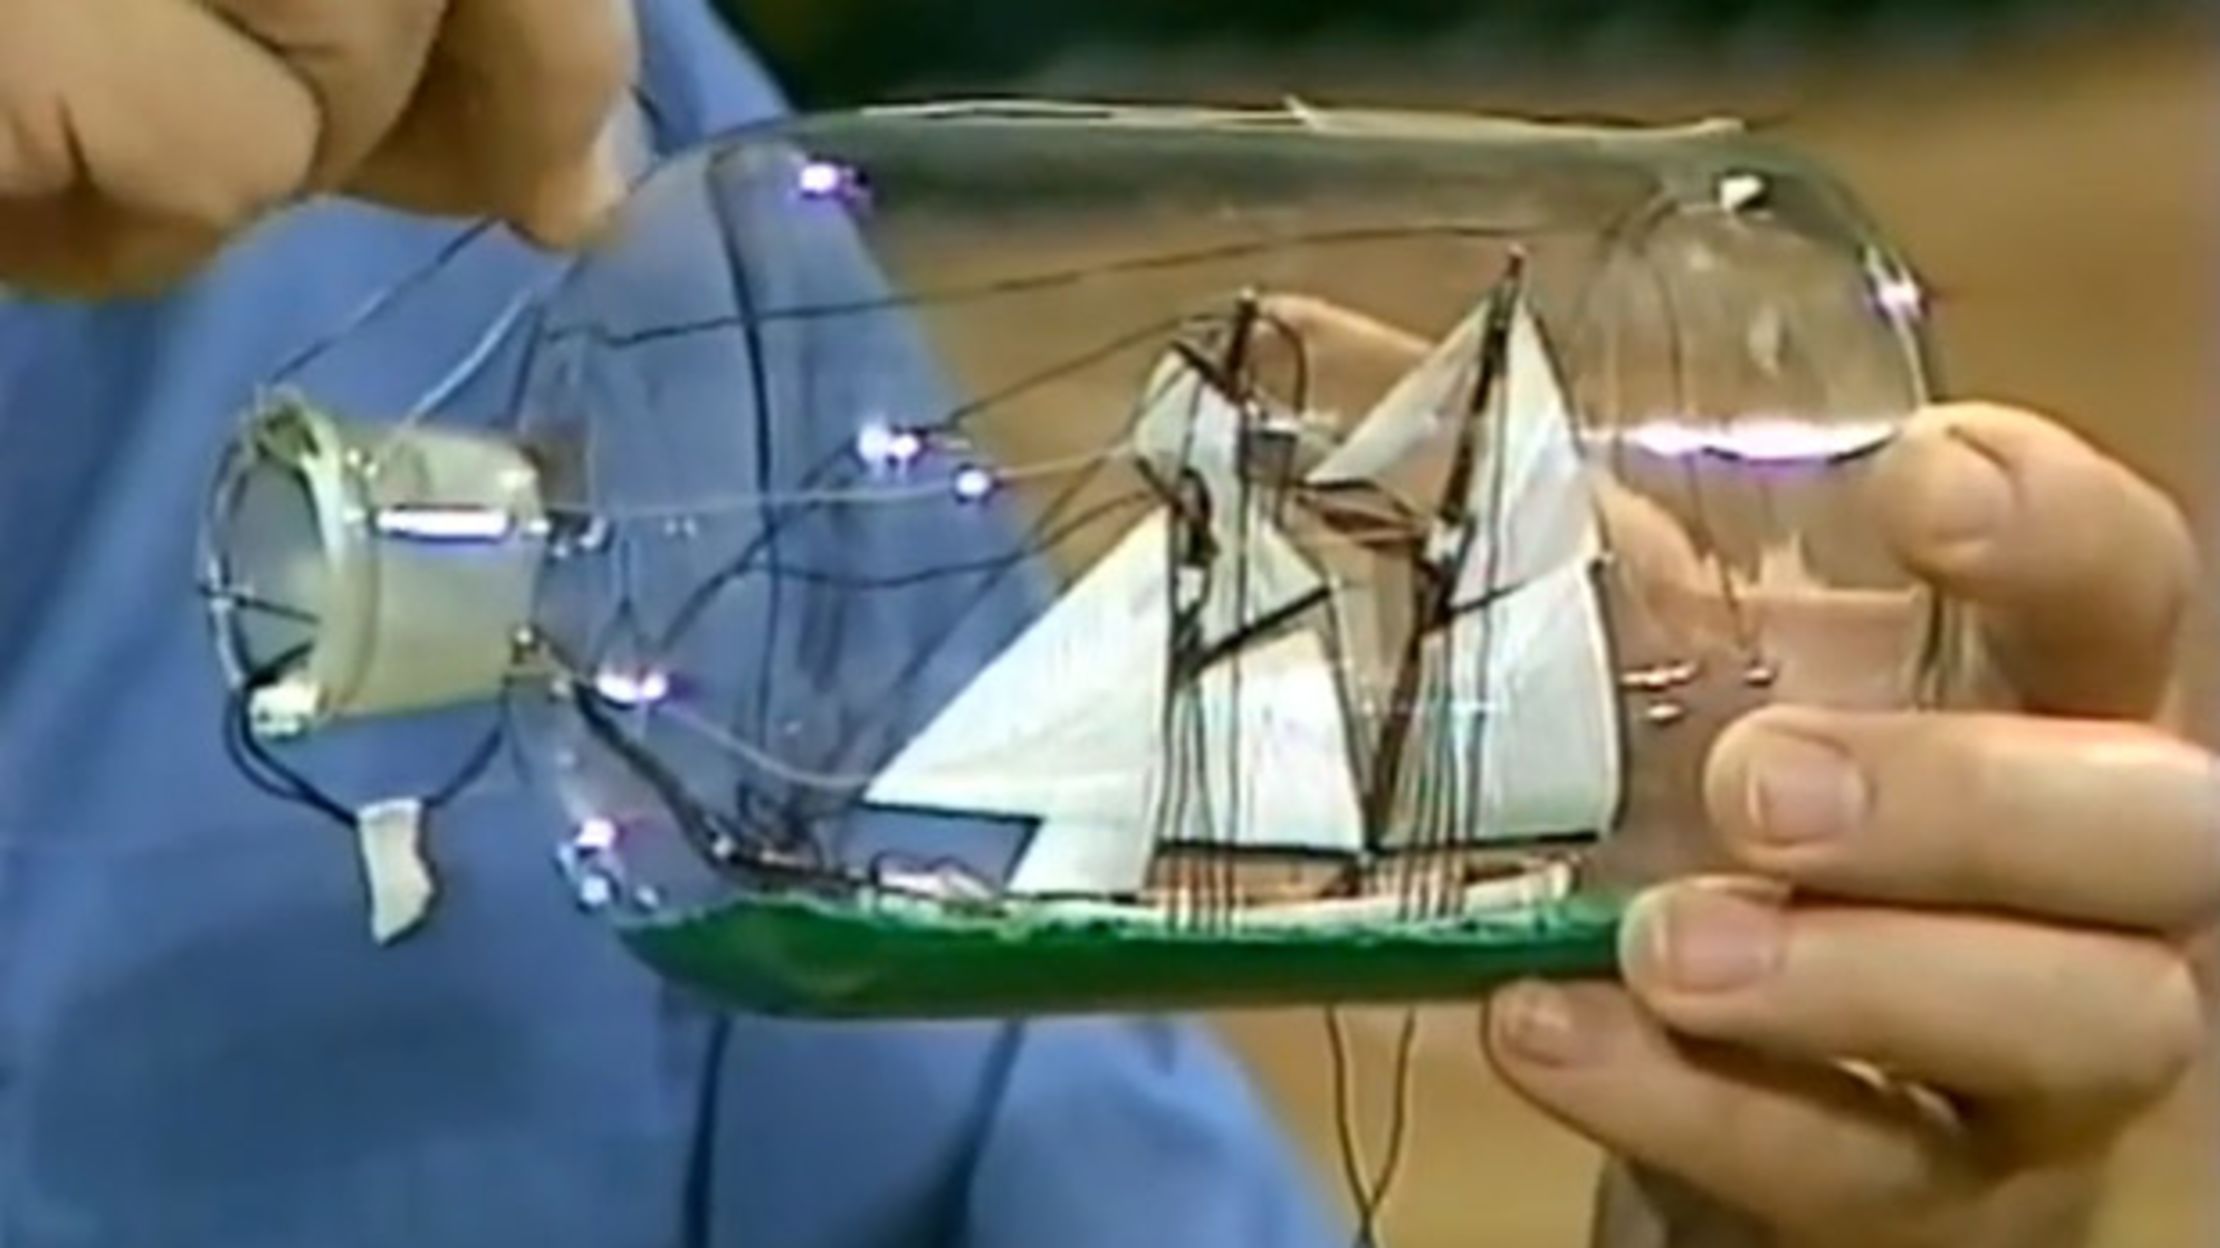 how to put a ship into a bottle mental floss